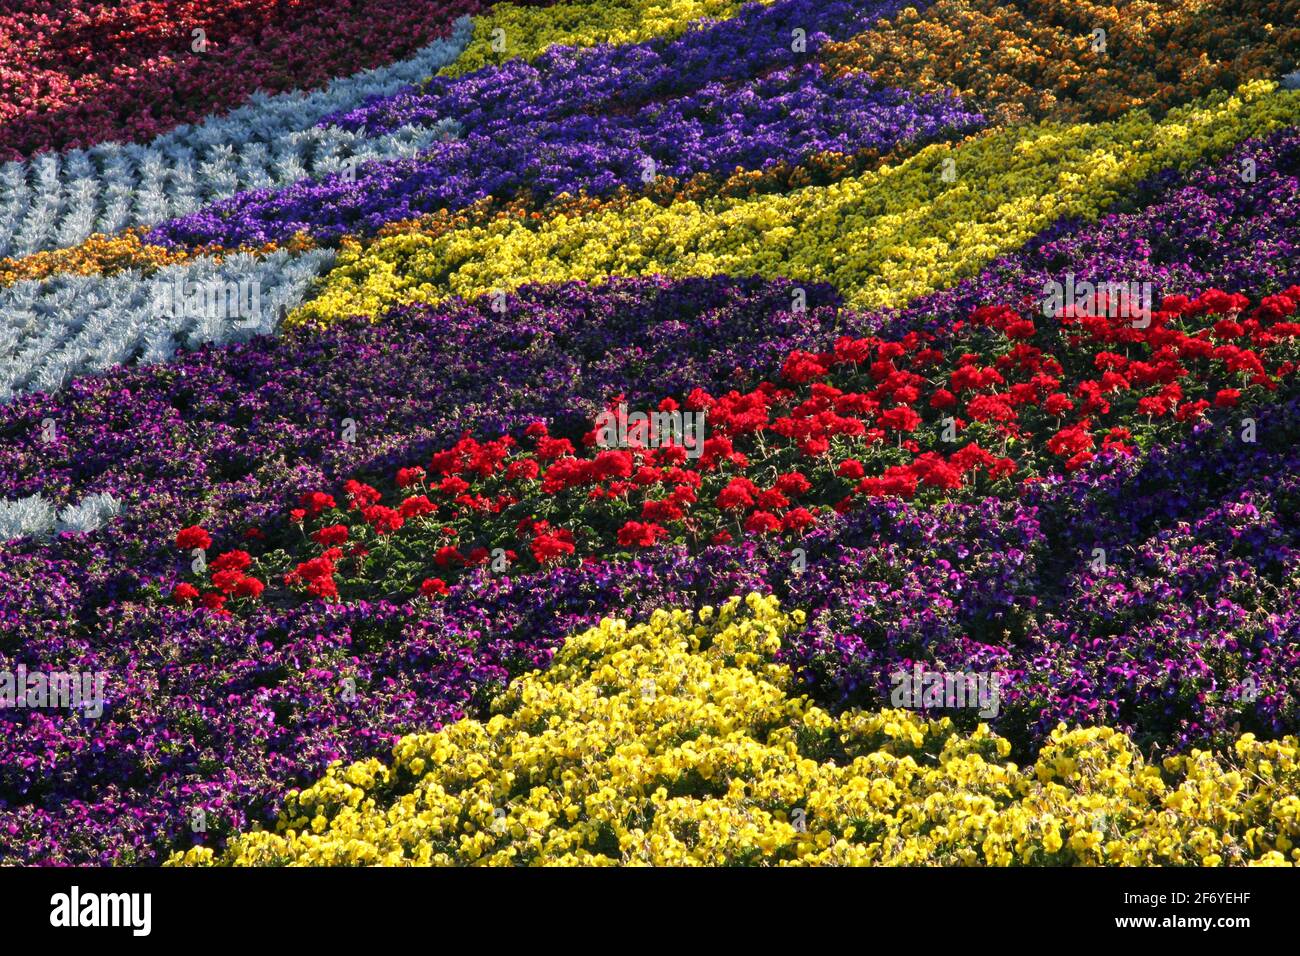 Bright colorful garden bed of flowers with an abstract patchwork design in purple , yellow, red and blue Stock Photo